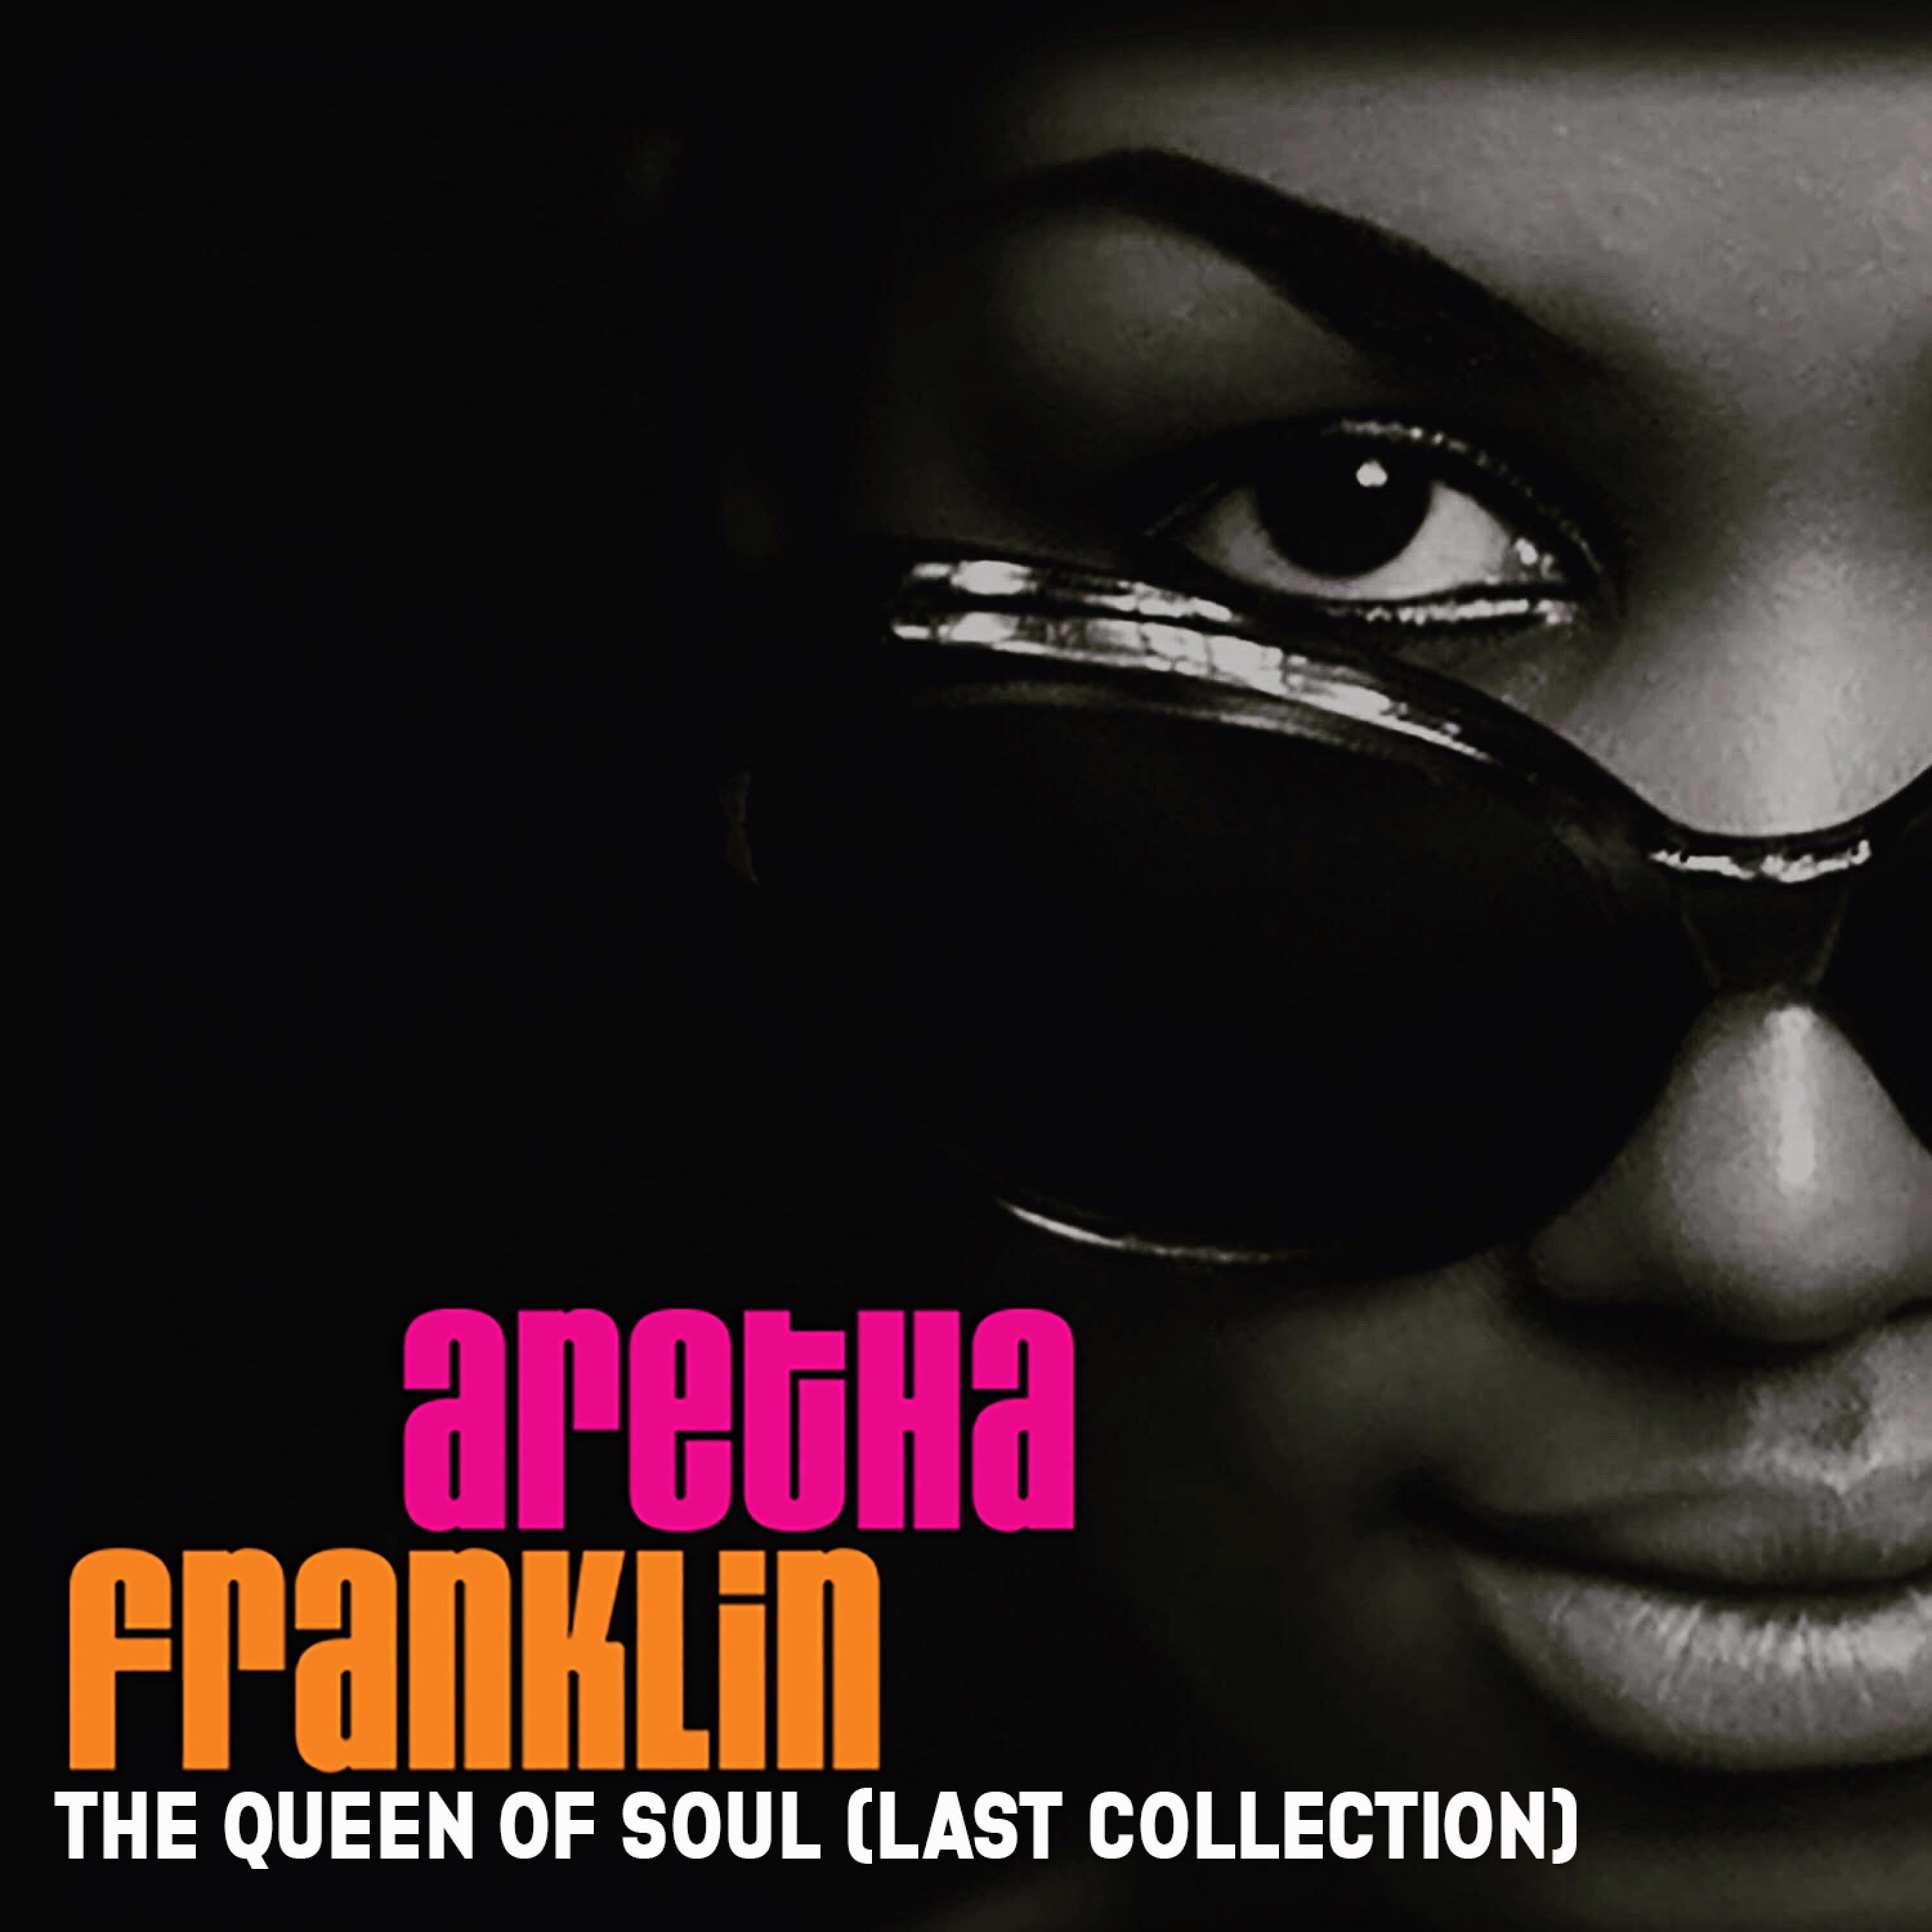 The Queen of Soul, Last Collection